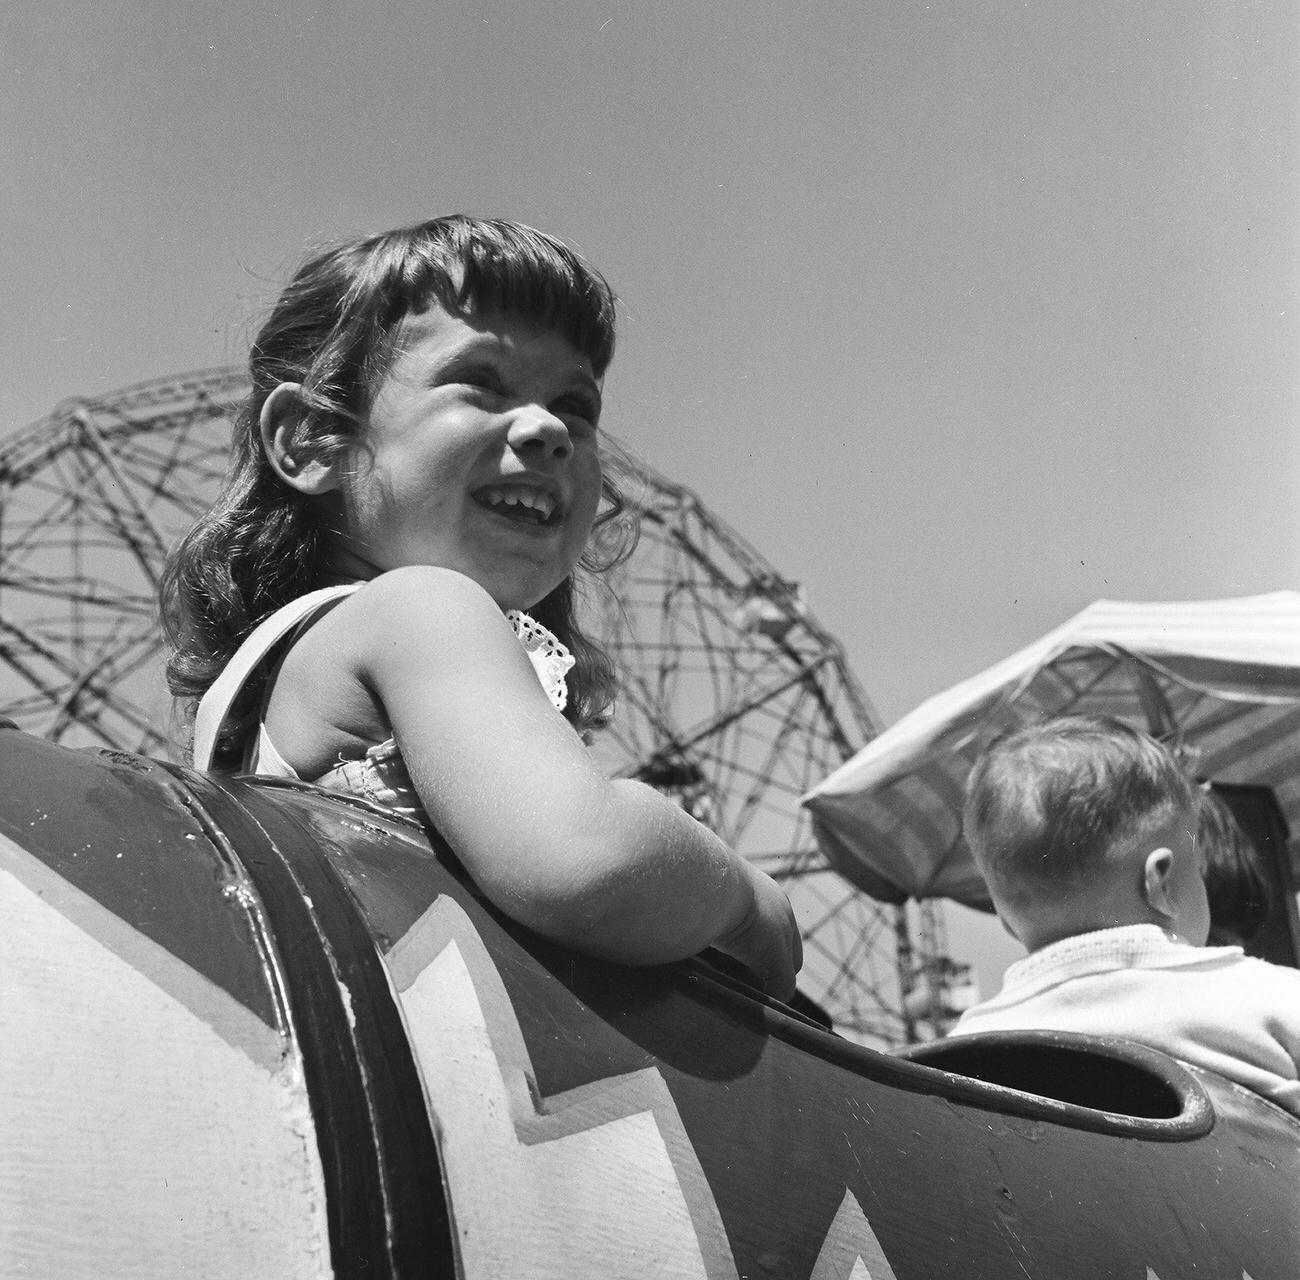 Young Girl Smiles In Anticipation On A Coney Island Ride, Ferris Wheel In Background, 1948